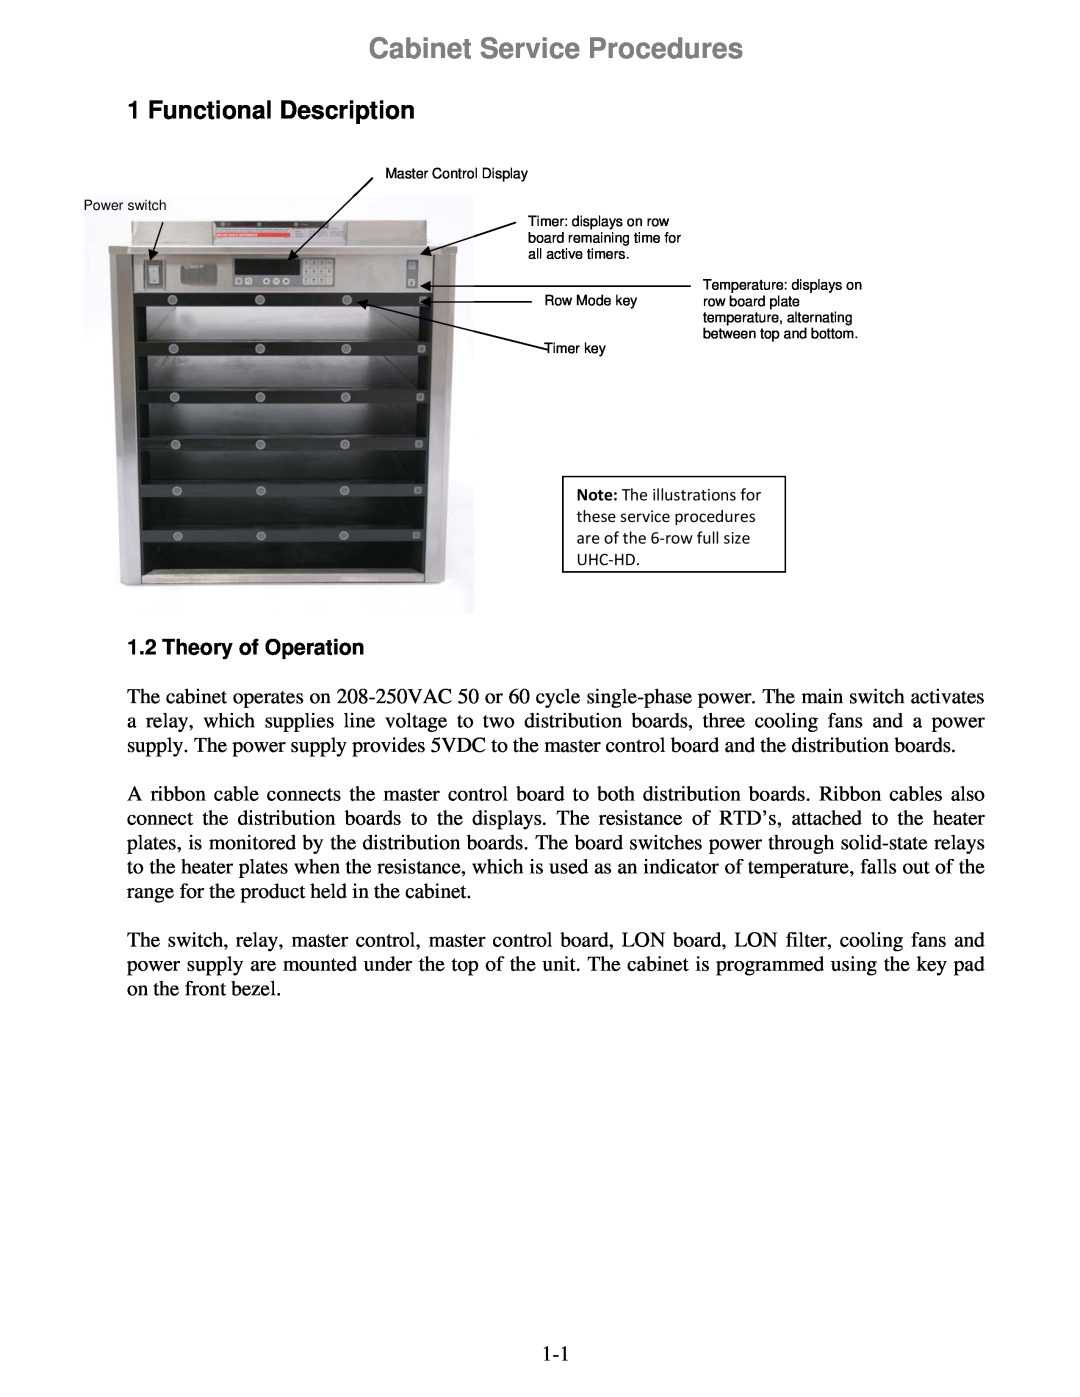 Frymaster UHC-HD manual Cabinet Service Procedures, Functional Description, Theory of Operation 